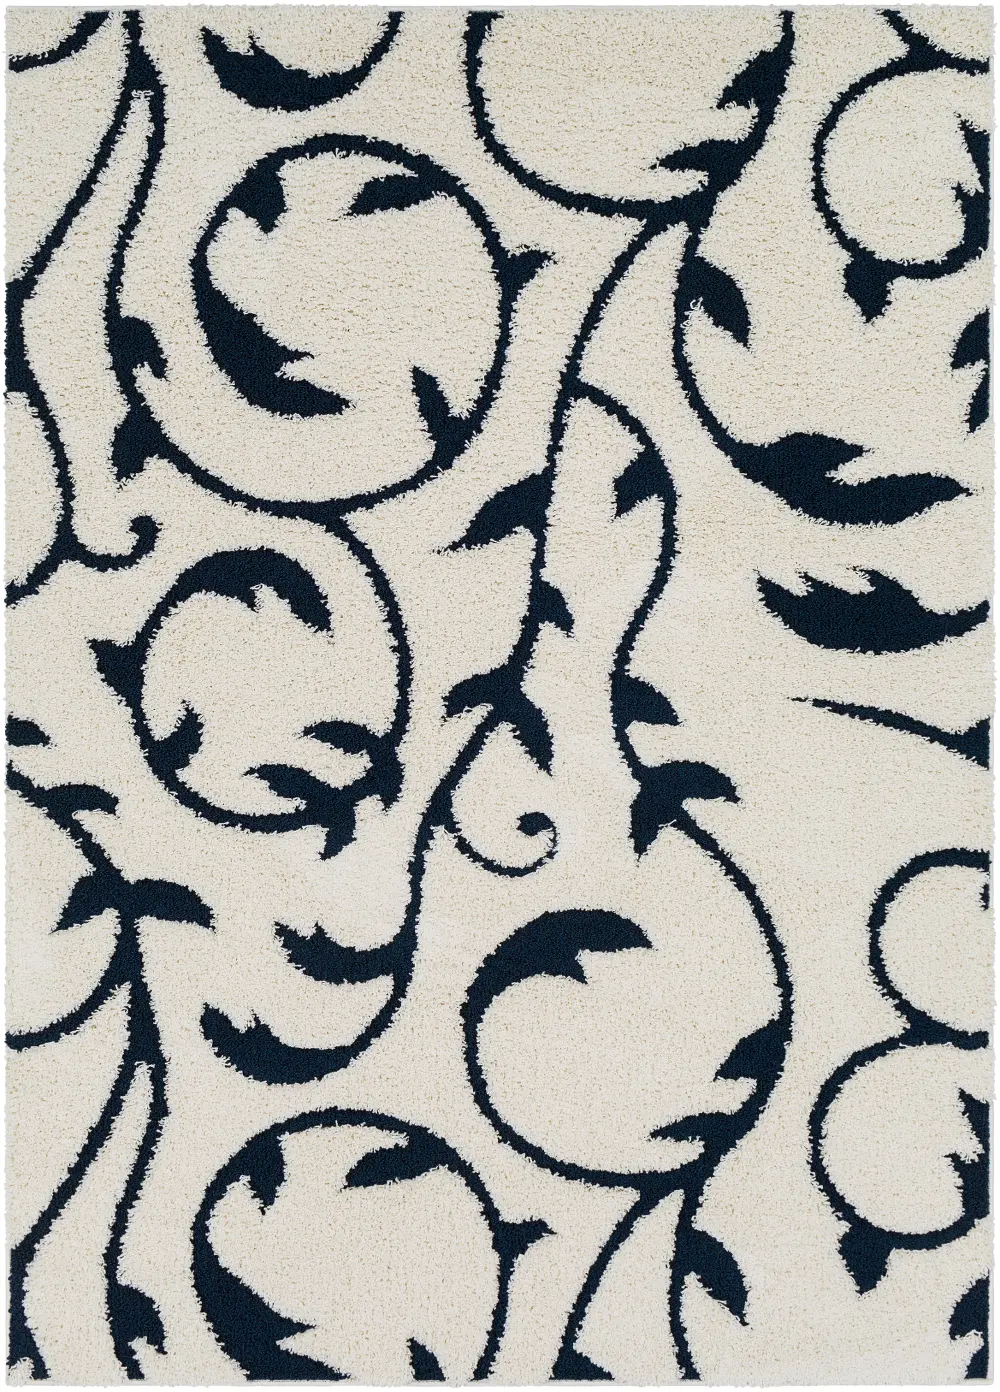 8 x 10 Large Cream and Navy Blue Rug - Cut and Loop-1